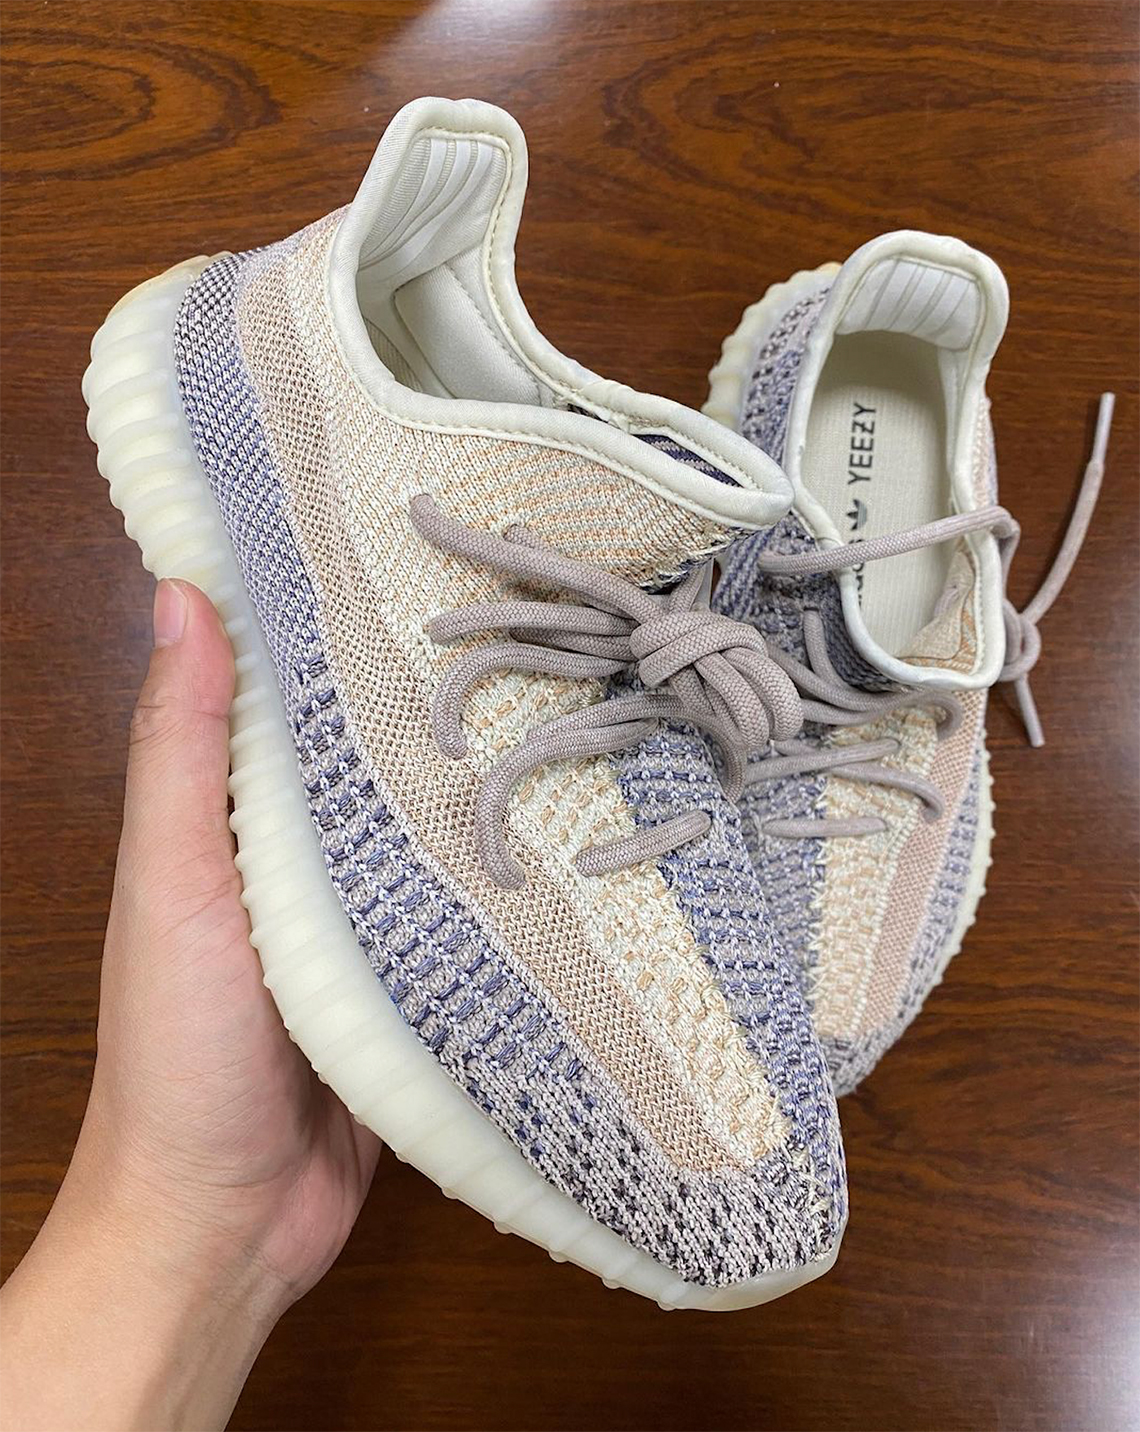 Adidas Yeezy Boost 350 V2 Ash Pearl Release Date 4792